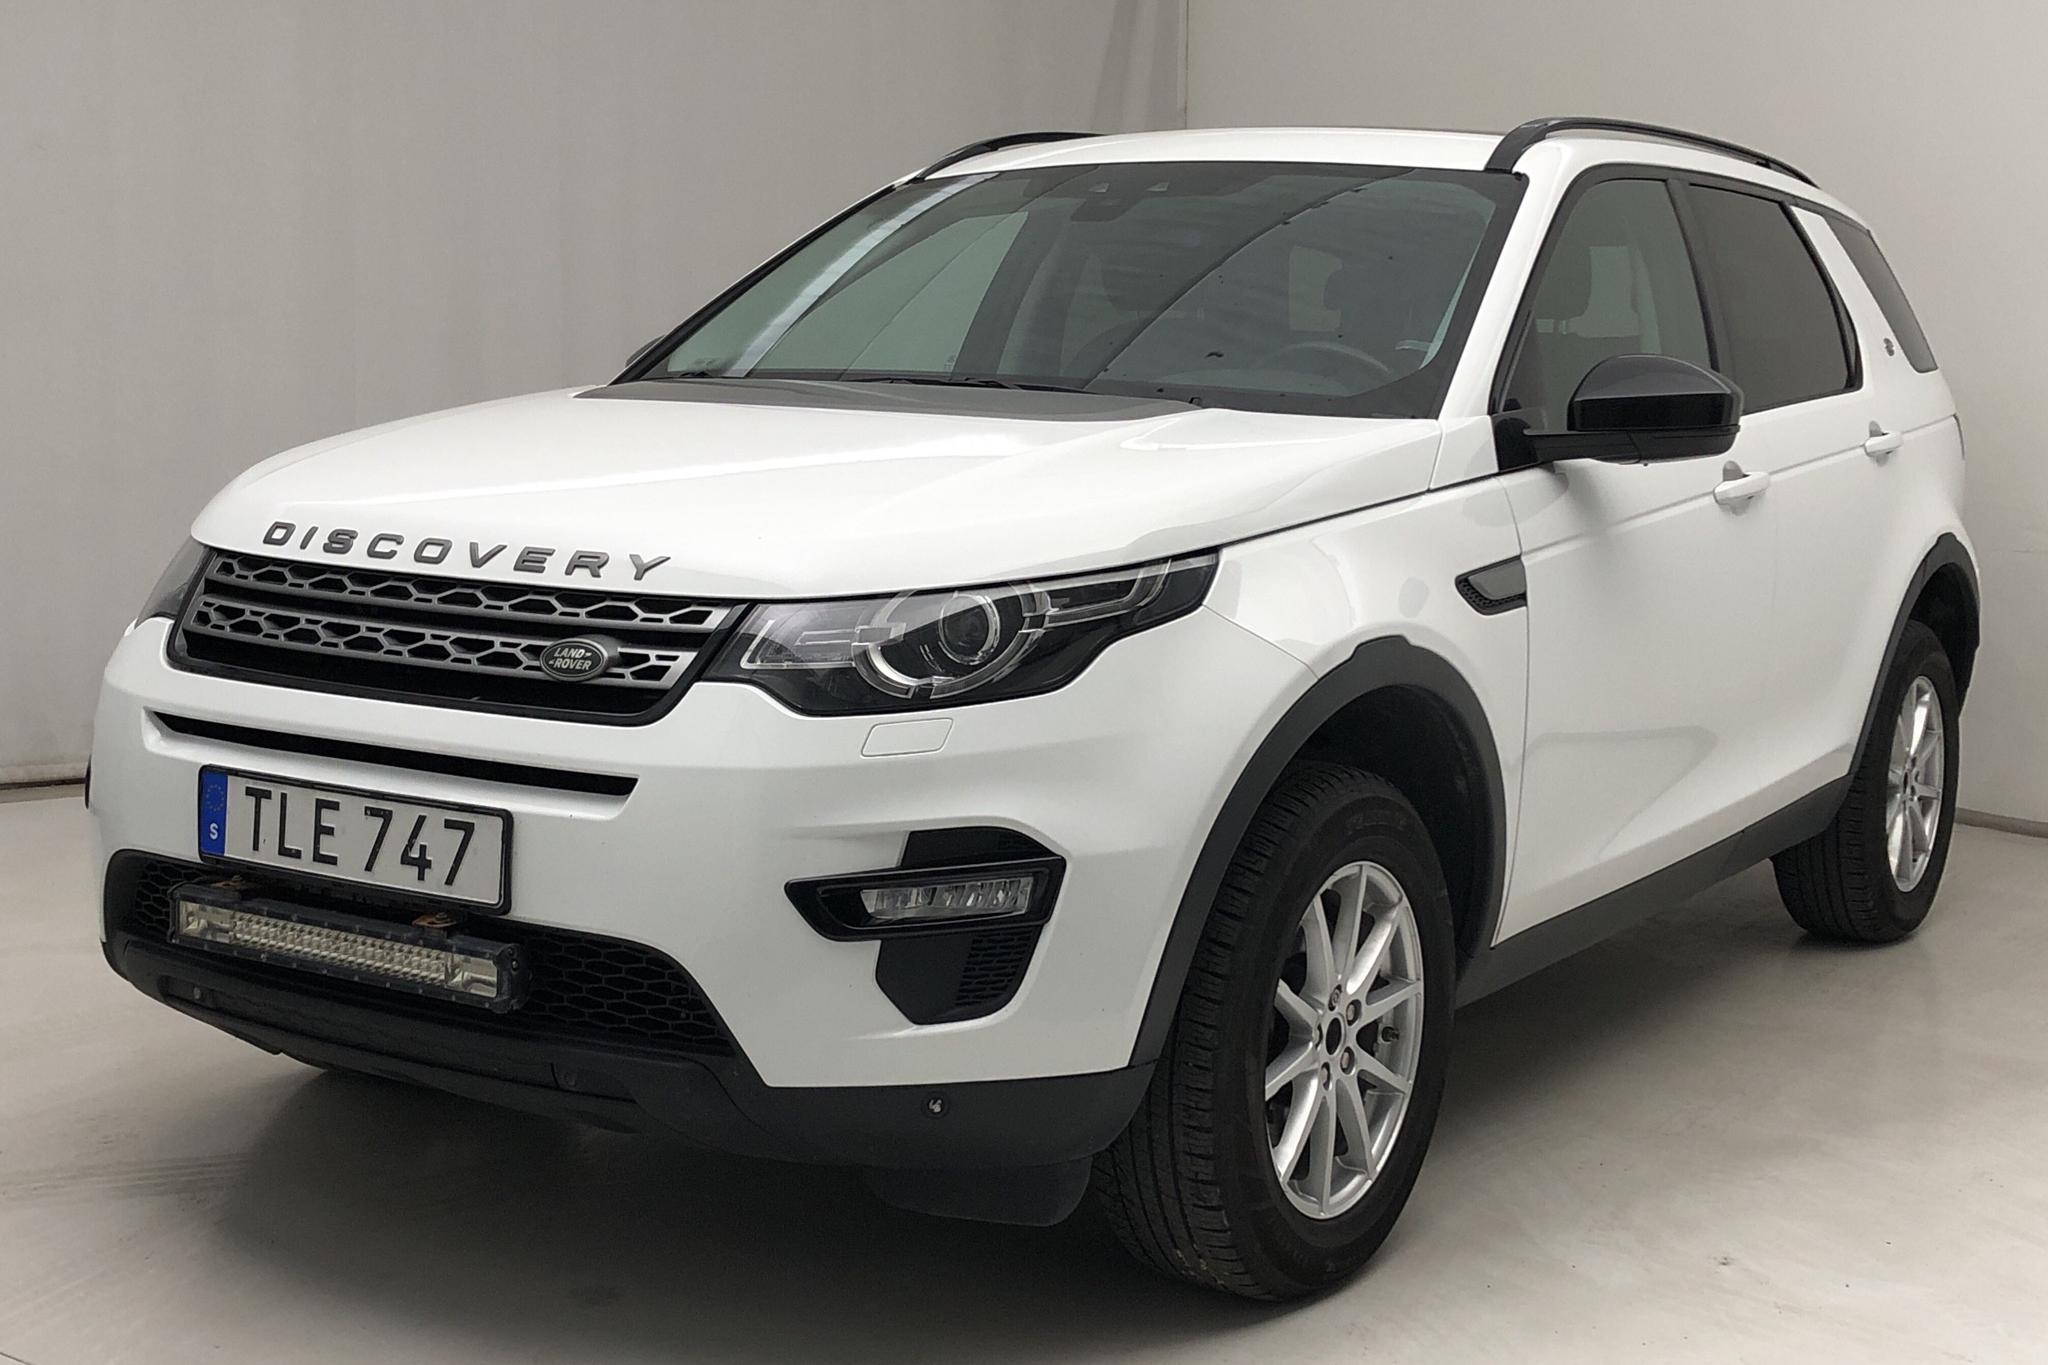 Land Rover Discovery Sport 2.0 TD4 AWD (180hk) - 120 790 km - Automatic - white - 2016